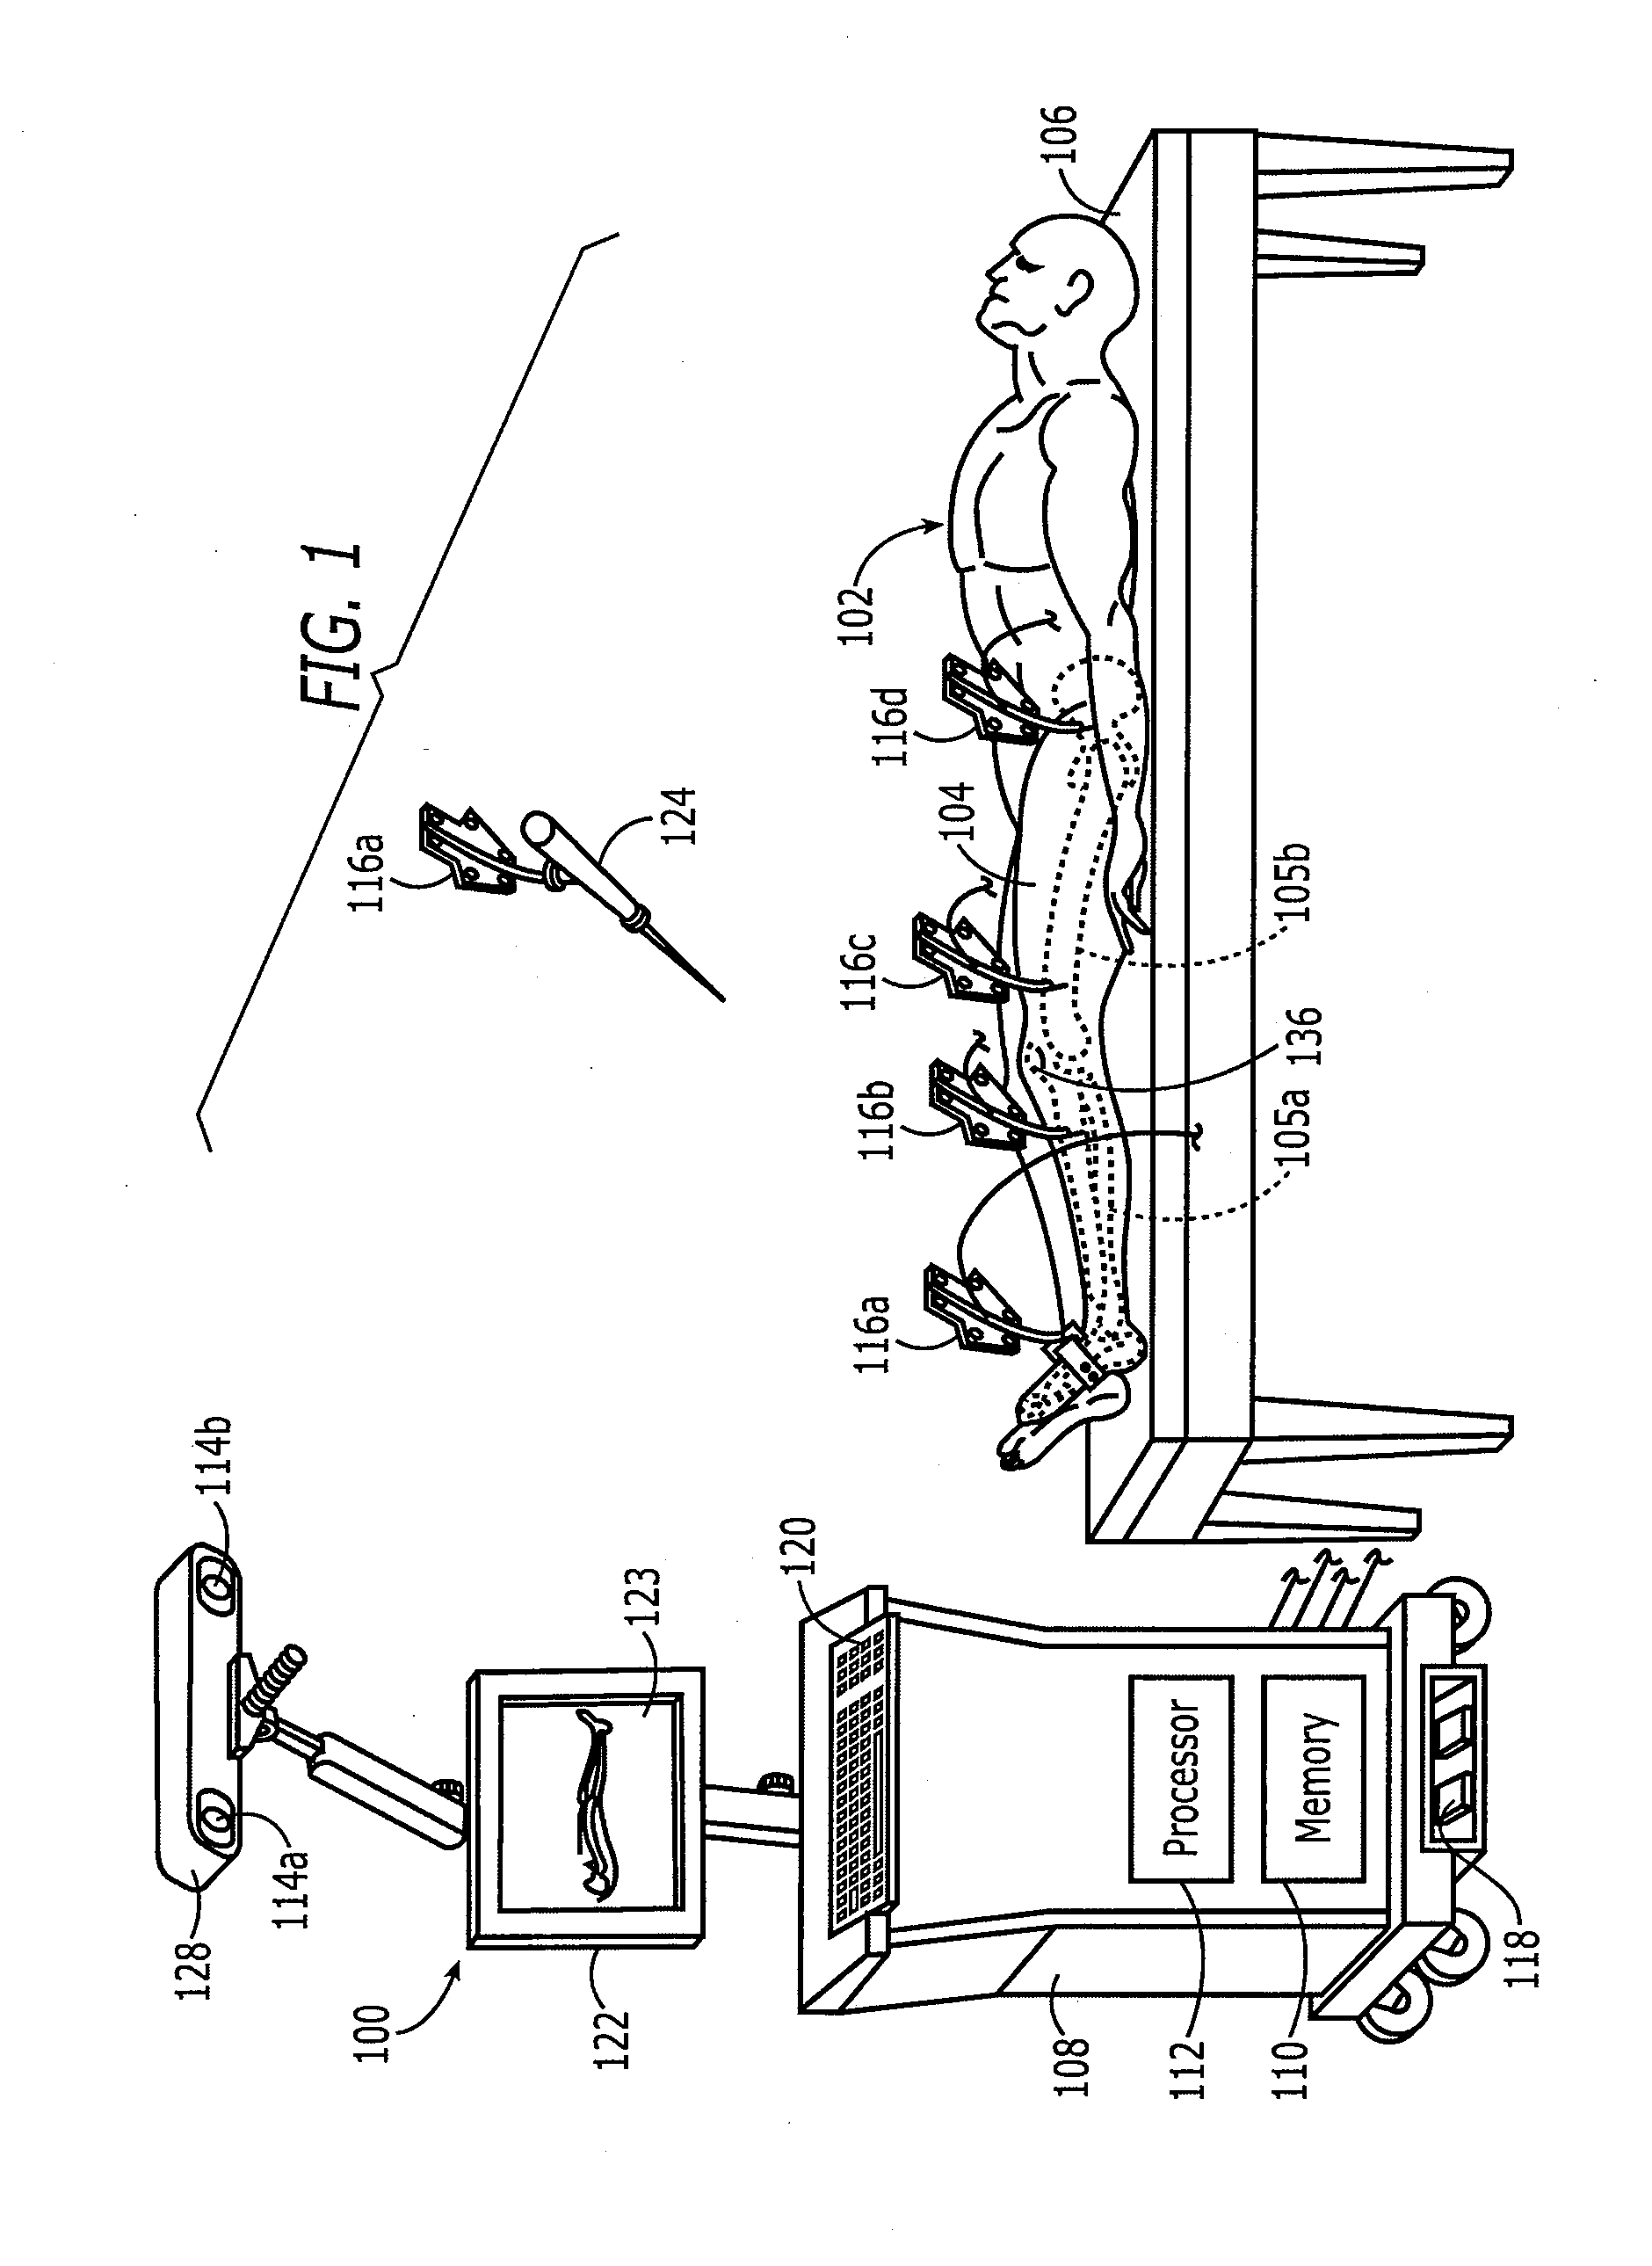 Method and apparatus for positioning a bone prosthesis using a localization system